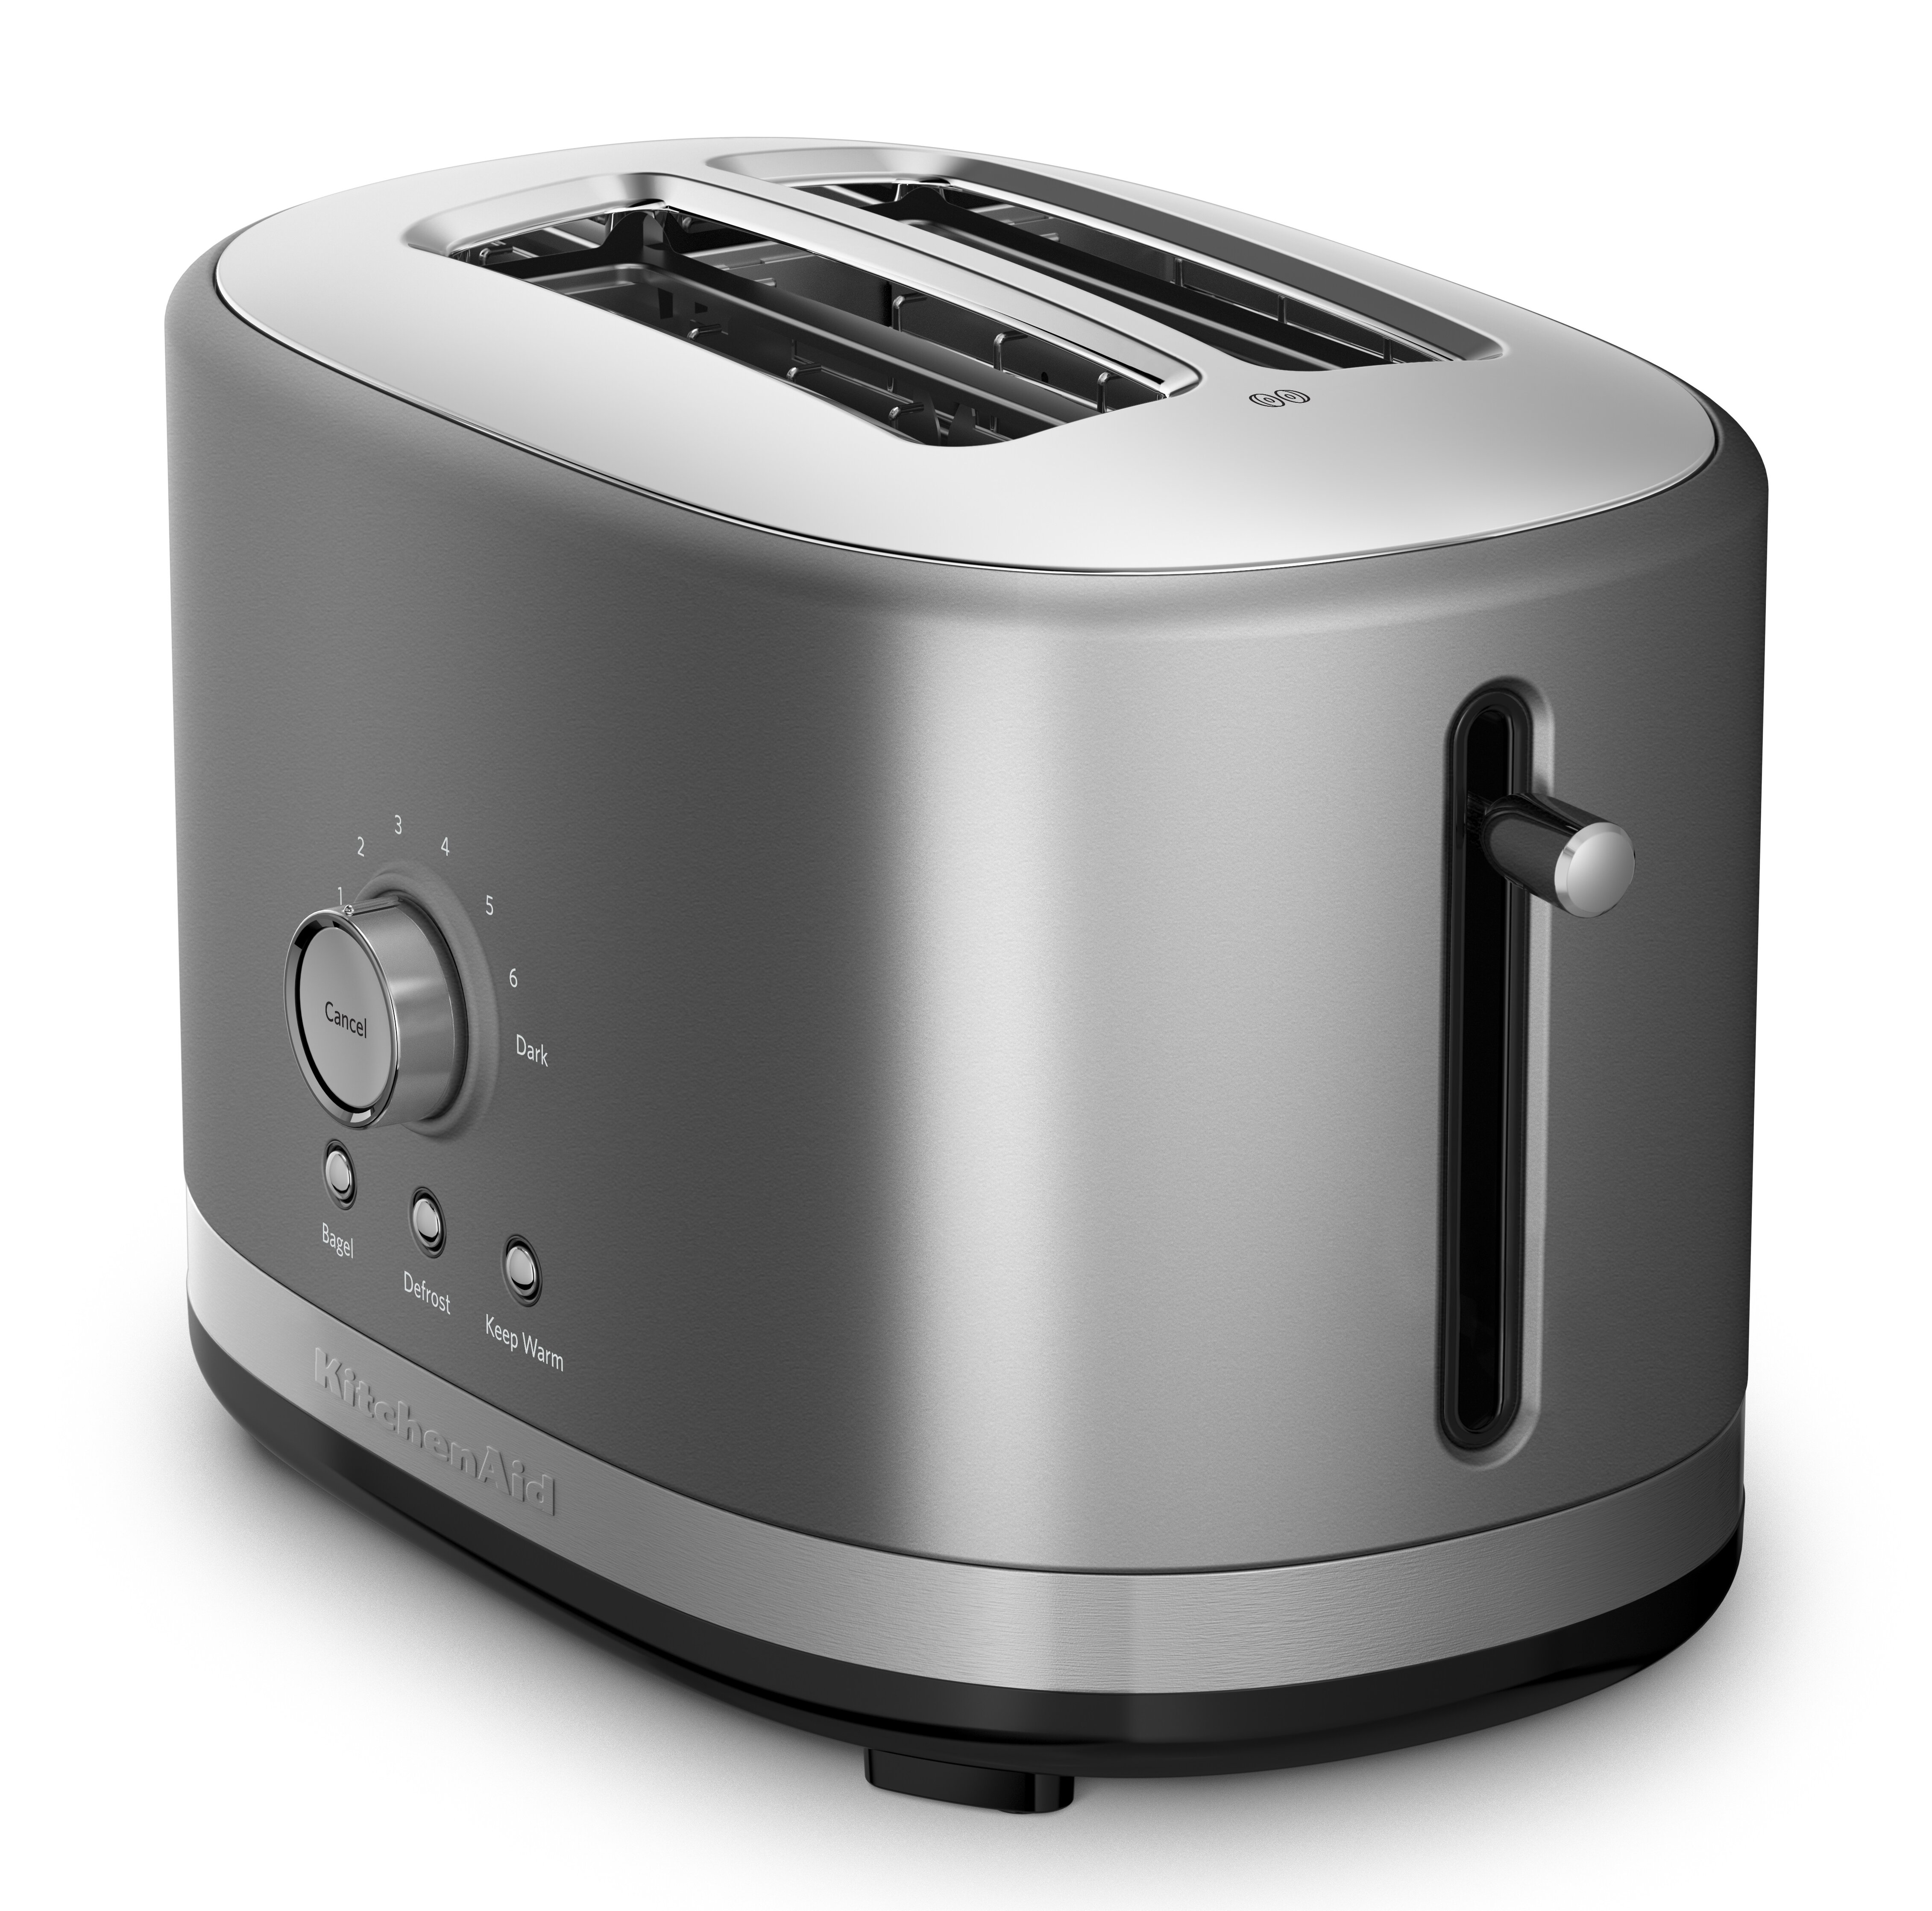 2-Slice Toaster with manual lift lever